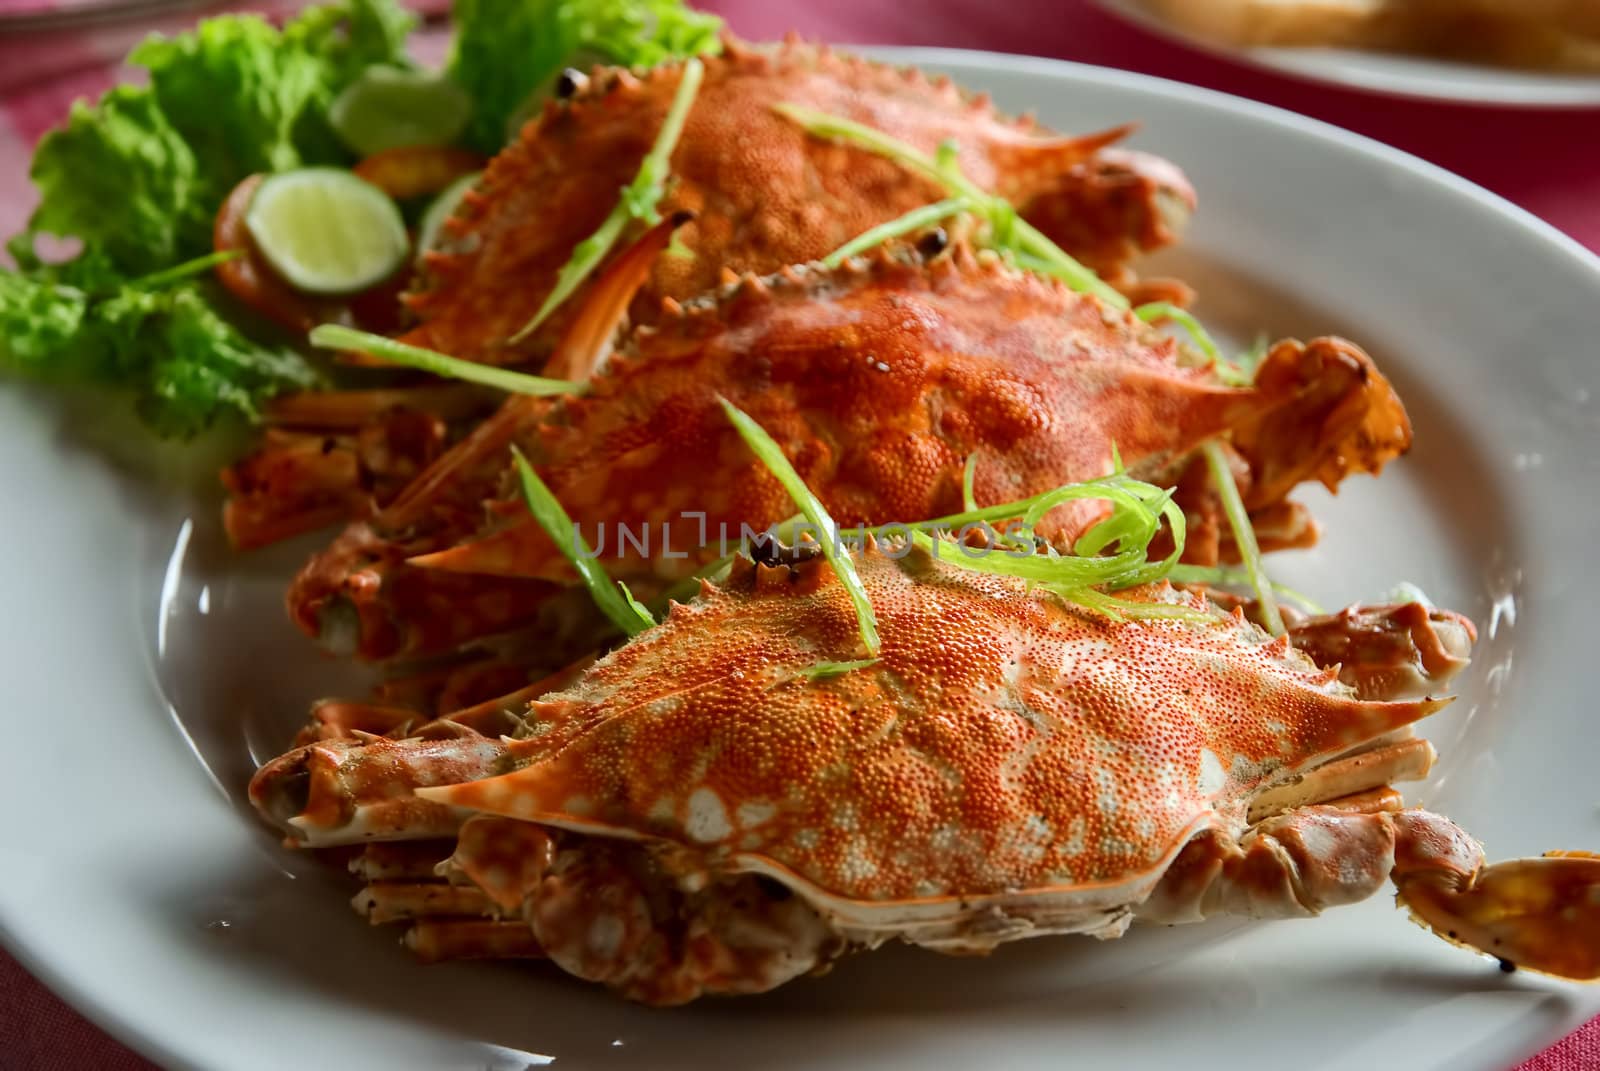 three large red crabs decorated with salad and lime on the plate